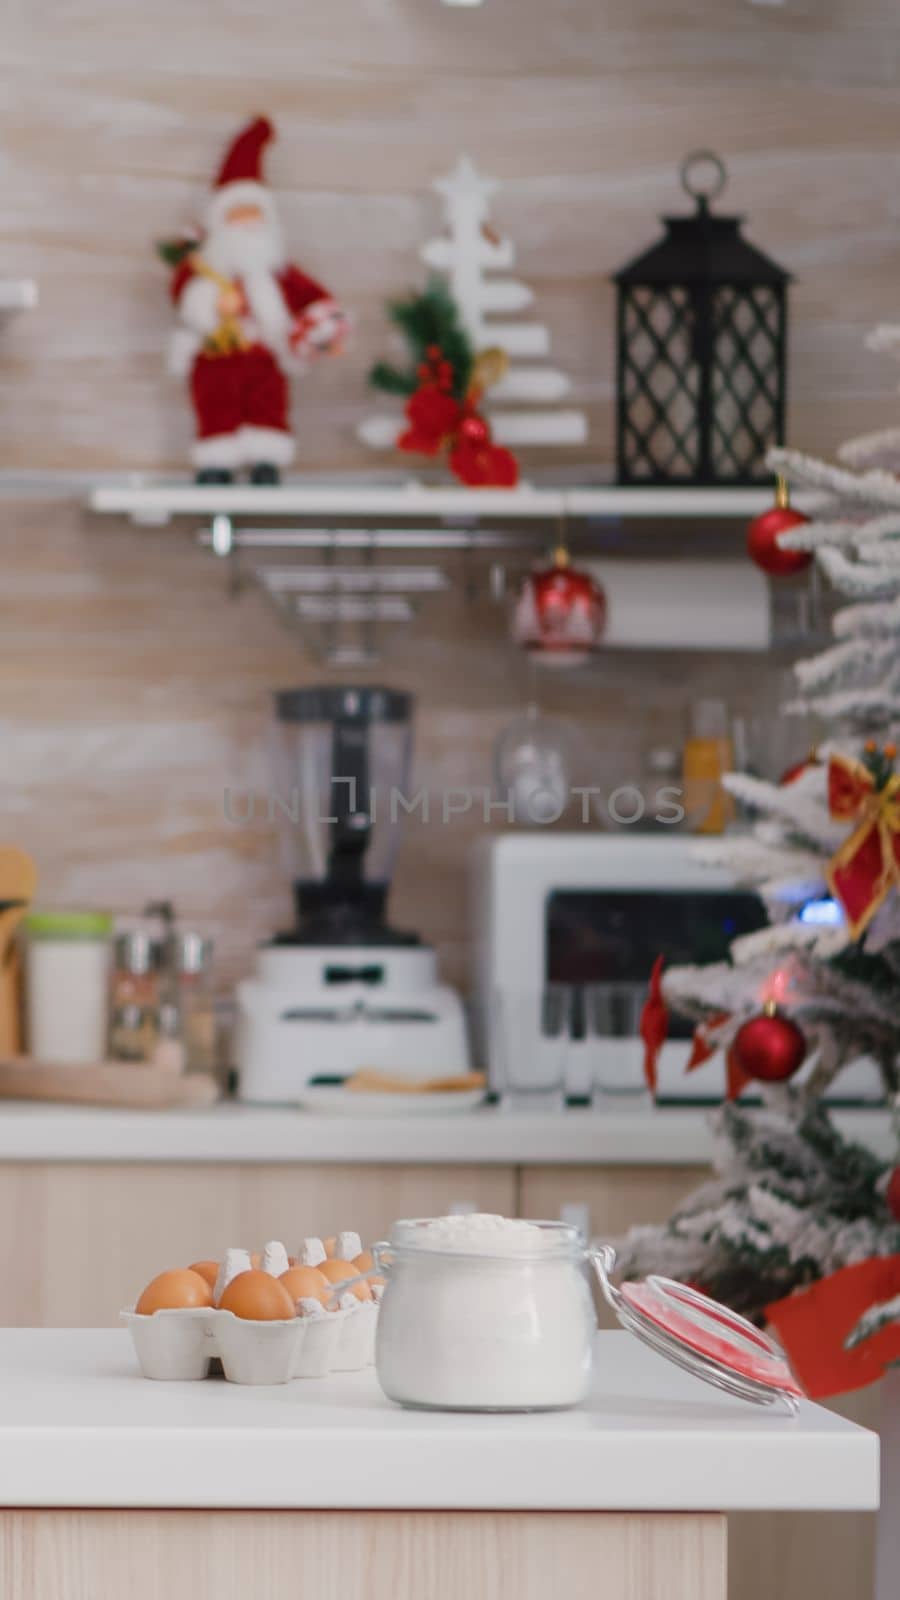 Empty christmas decorated culinary kitchen with nobody in it ready for traditional festive holiday. On table standing homemade cookie dessert ingredients with glass of milk, strainer